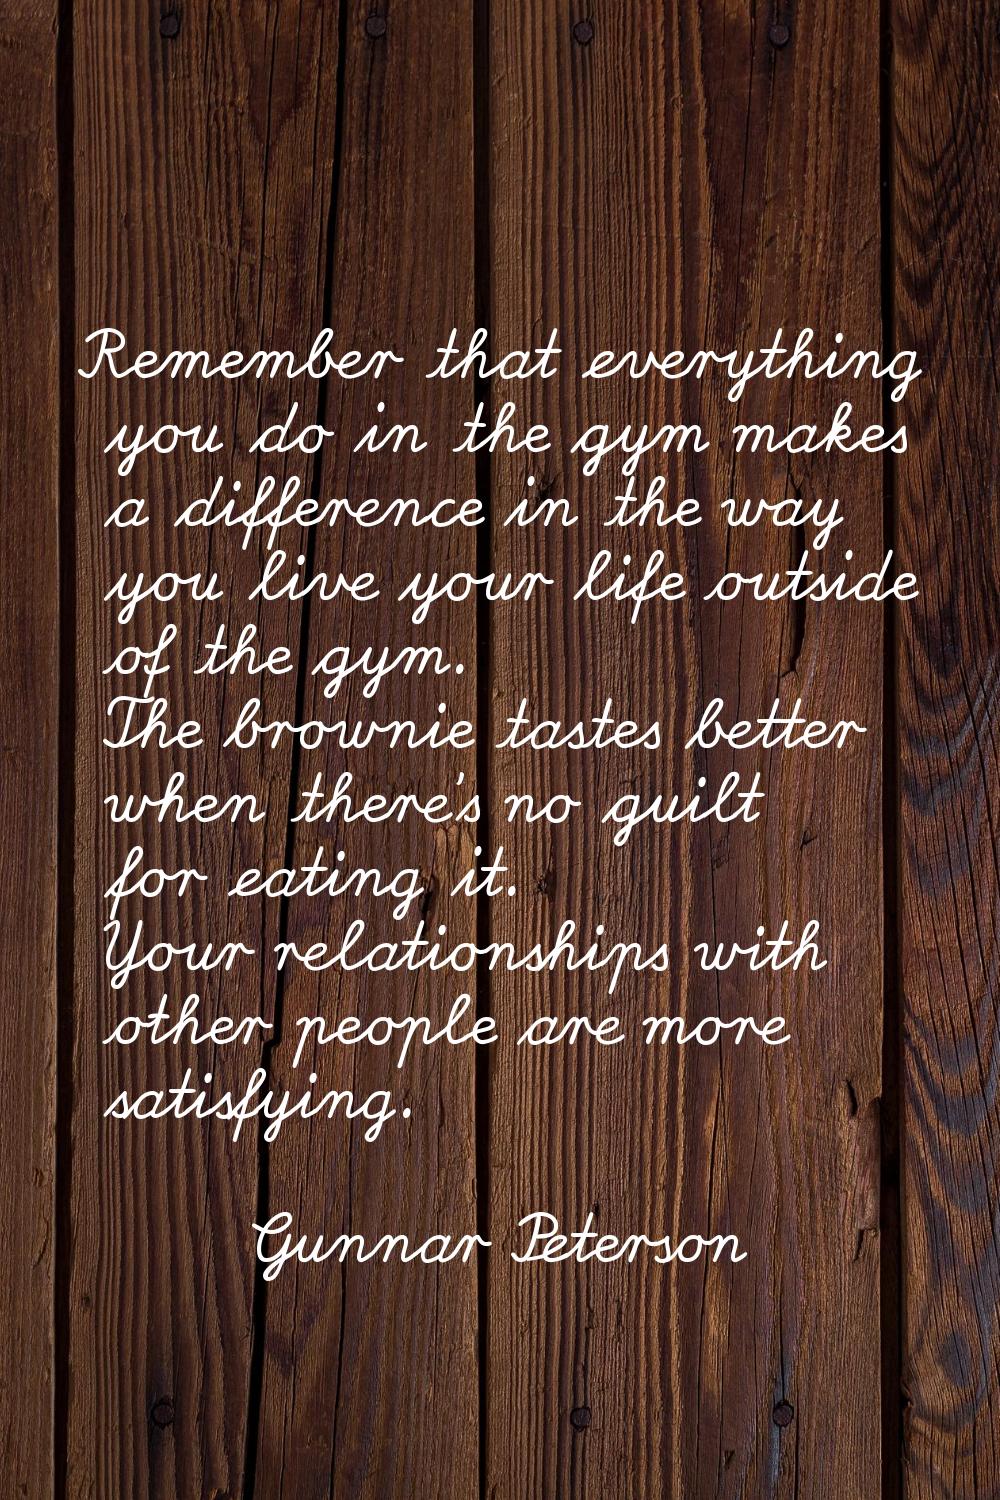 Remember that everything you do in the gym makes a difference in the way you live your life outside